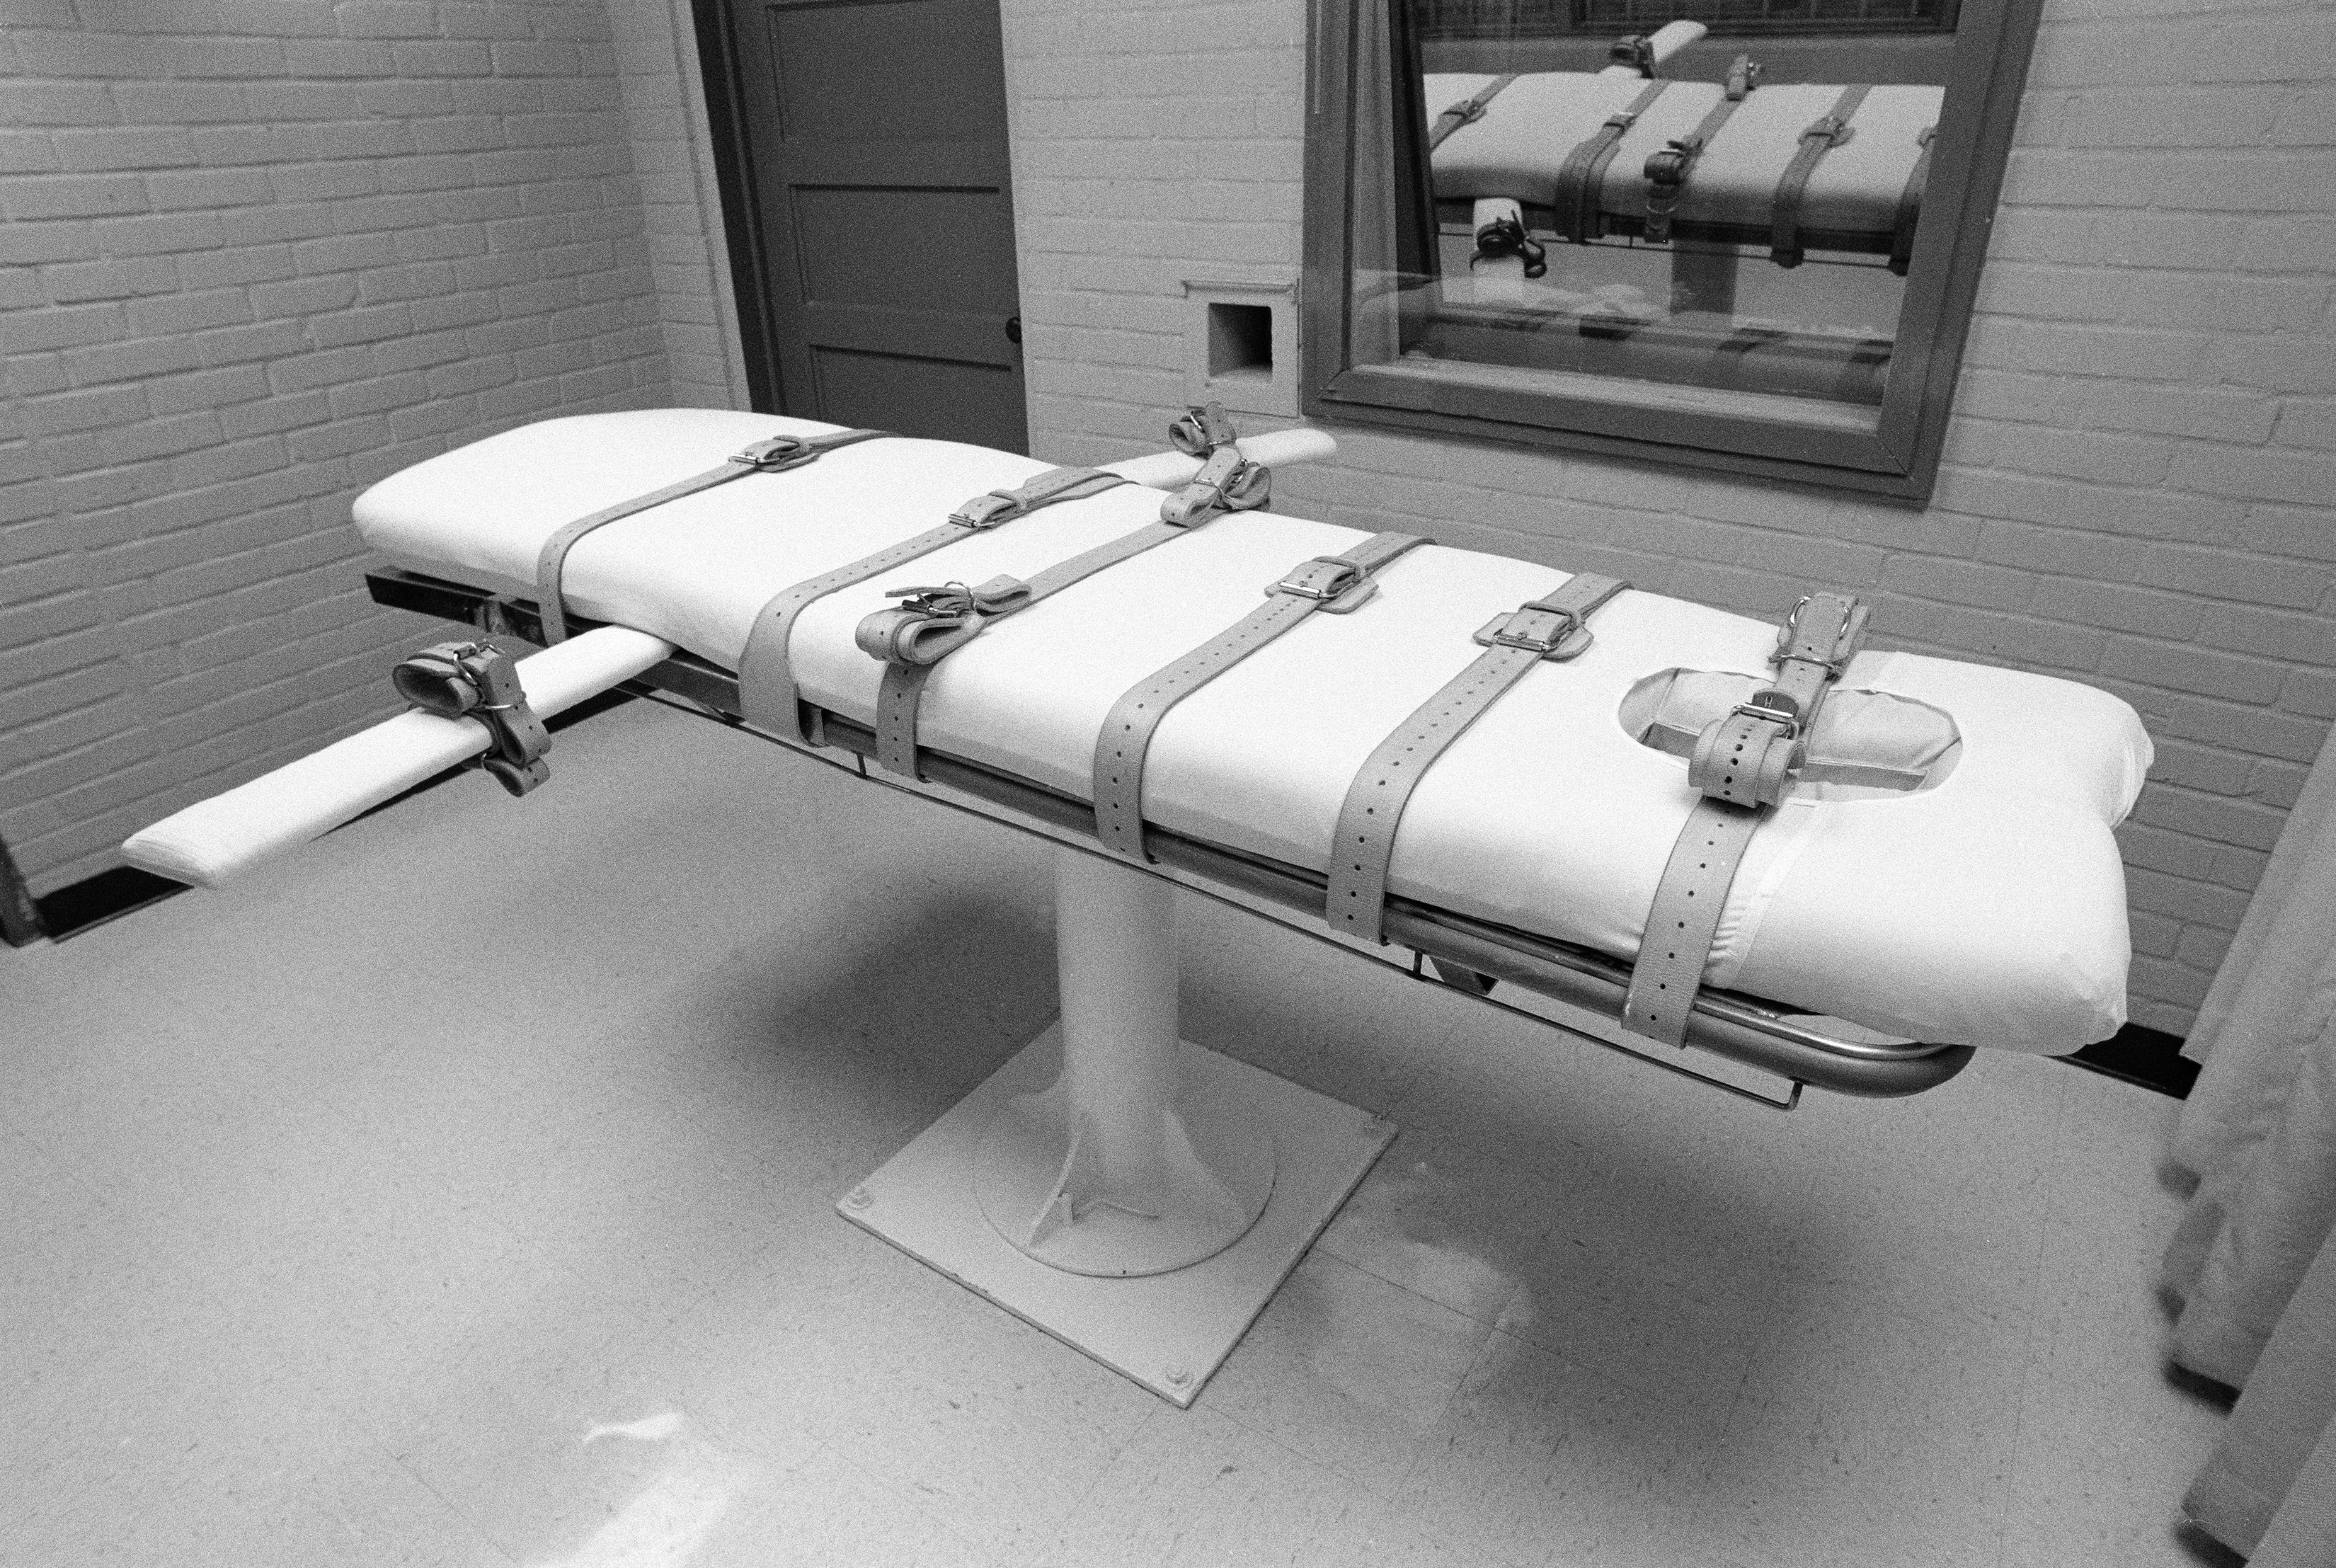 New Execution Method Touted as More ‘Humane,’ but Evidence Is Lacking